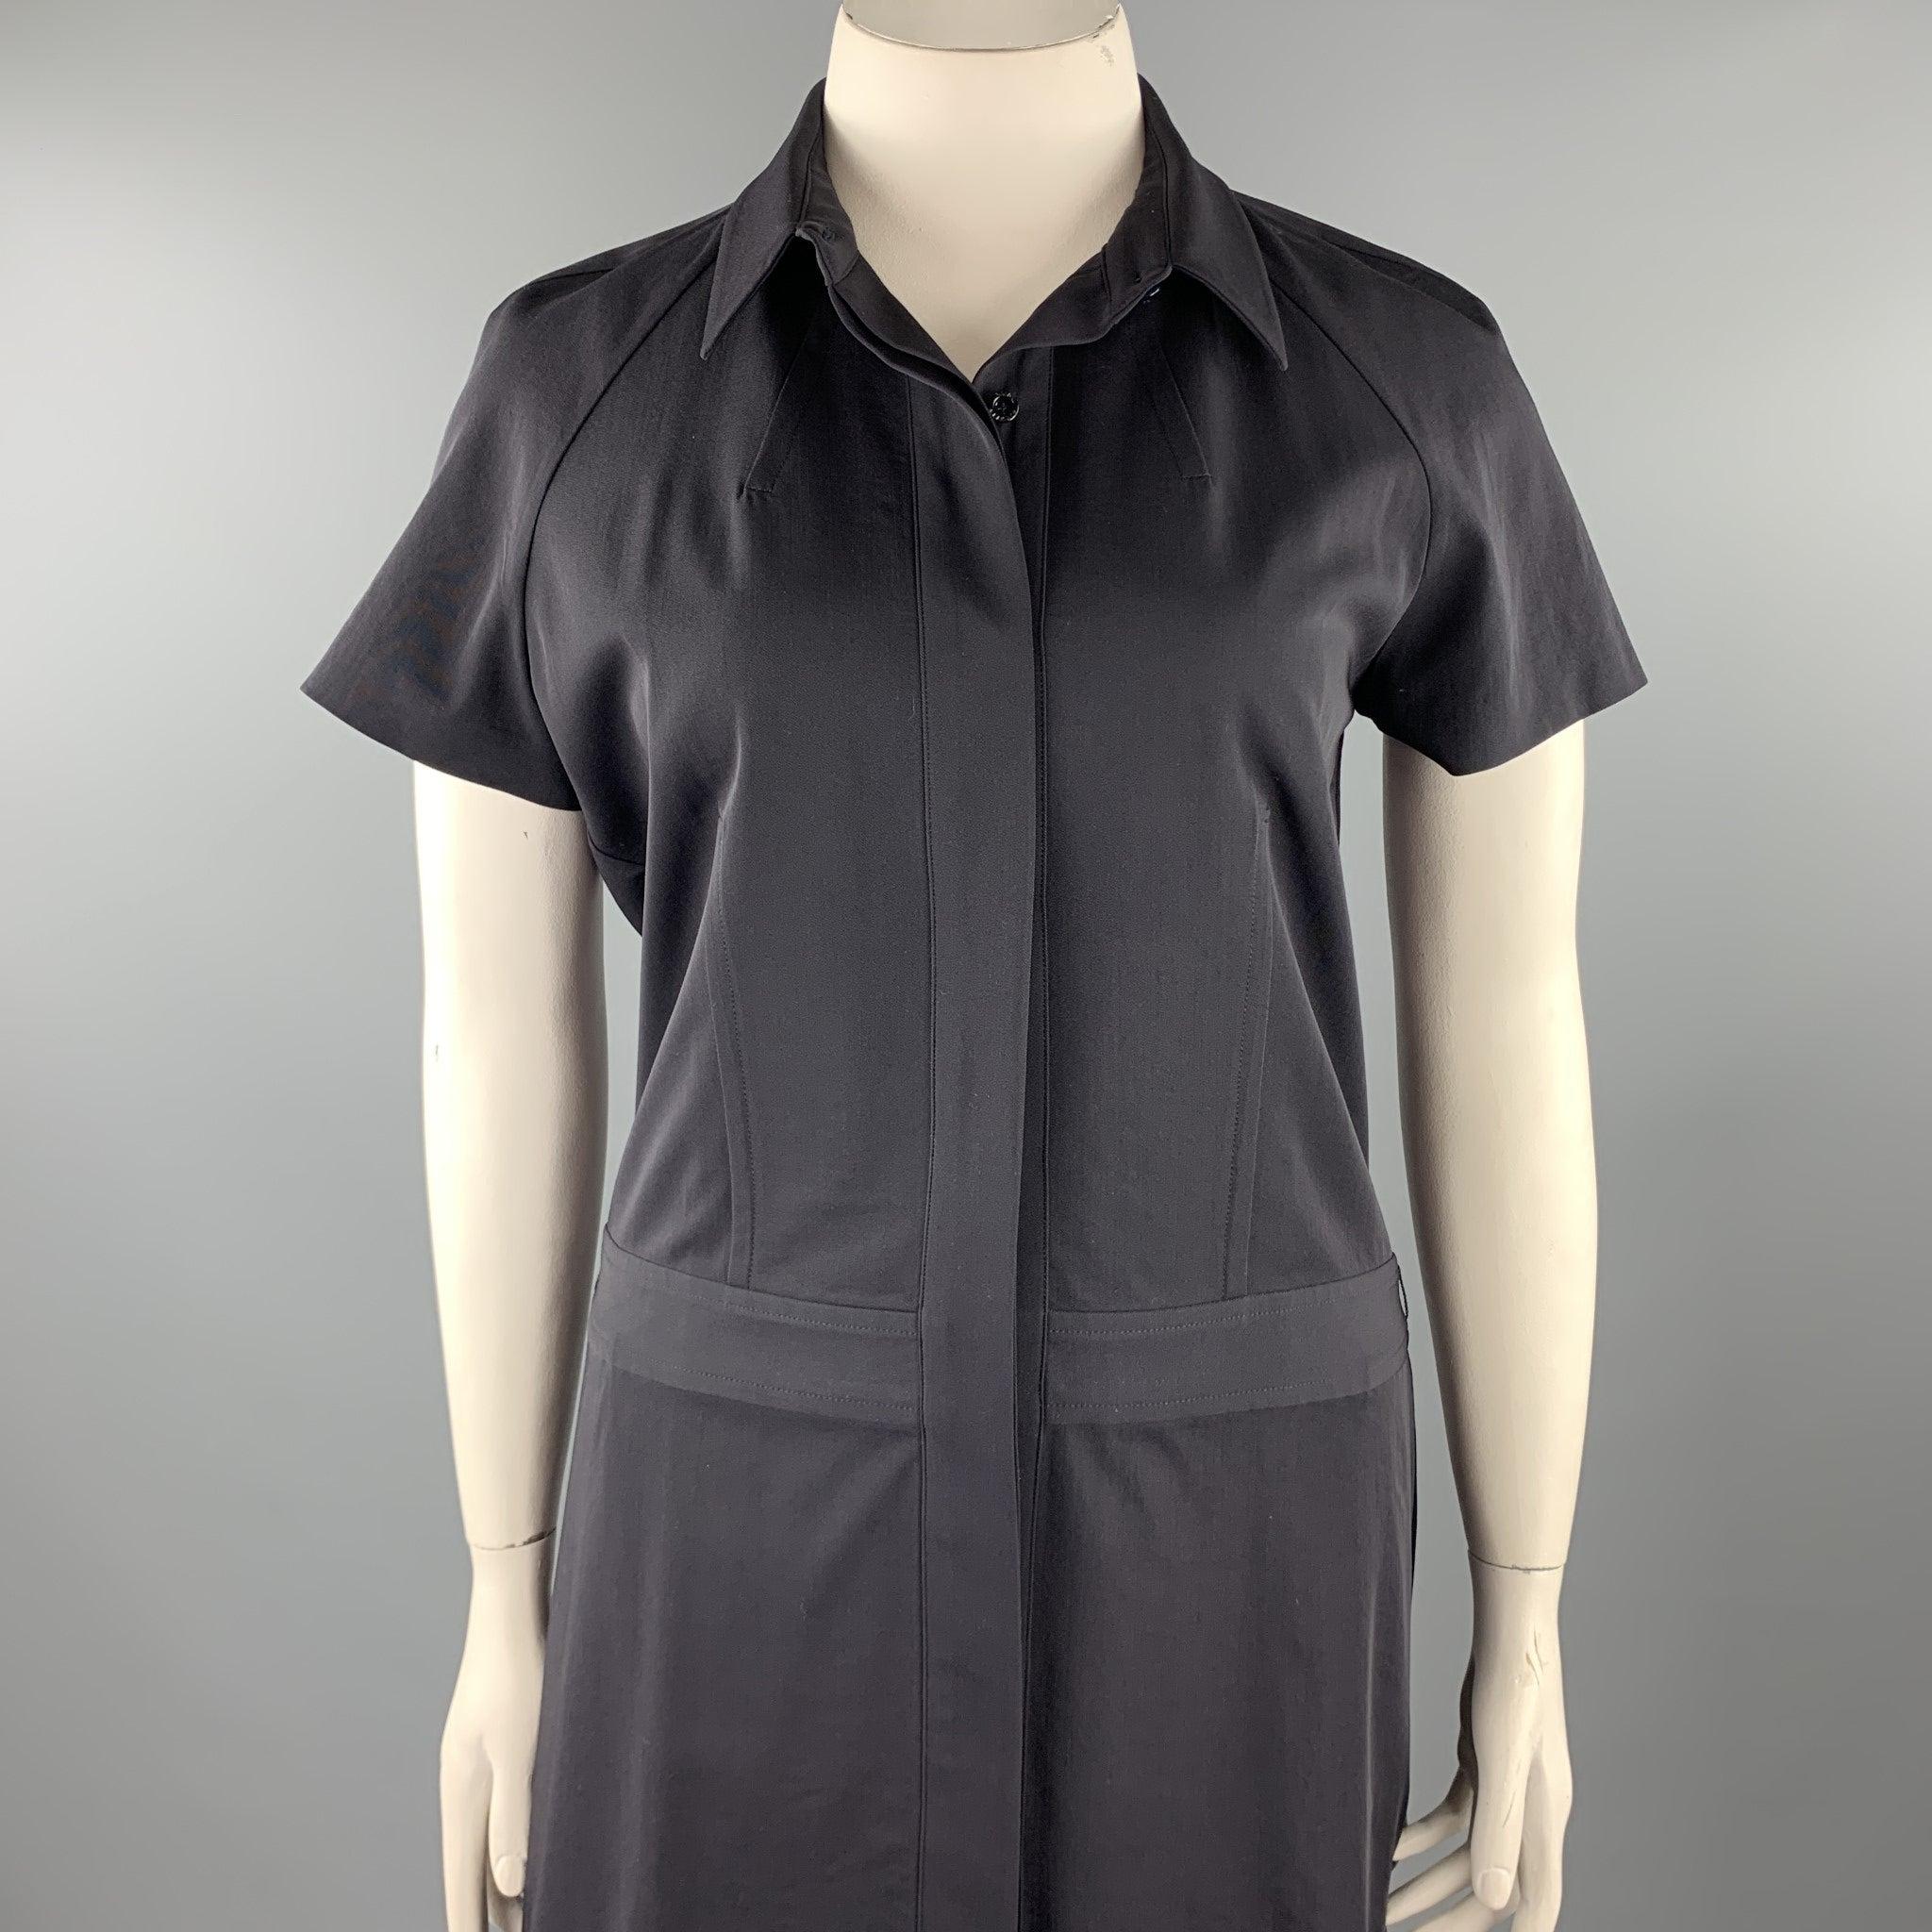 REED KRAKOFF shirt dress comes in a navy virgin wool featuring short sleeves, spread collar, slit pockets, and a hidden buttoned closure. Made in Italy.Excellent
Pre-Owned Condition. 

Marked:   12 

Measurements: 
 
Shoulder: 17 inches 
Bust: 40